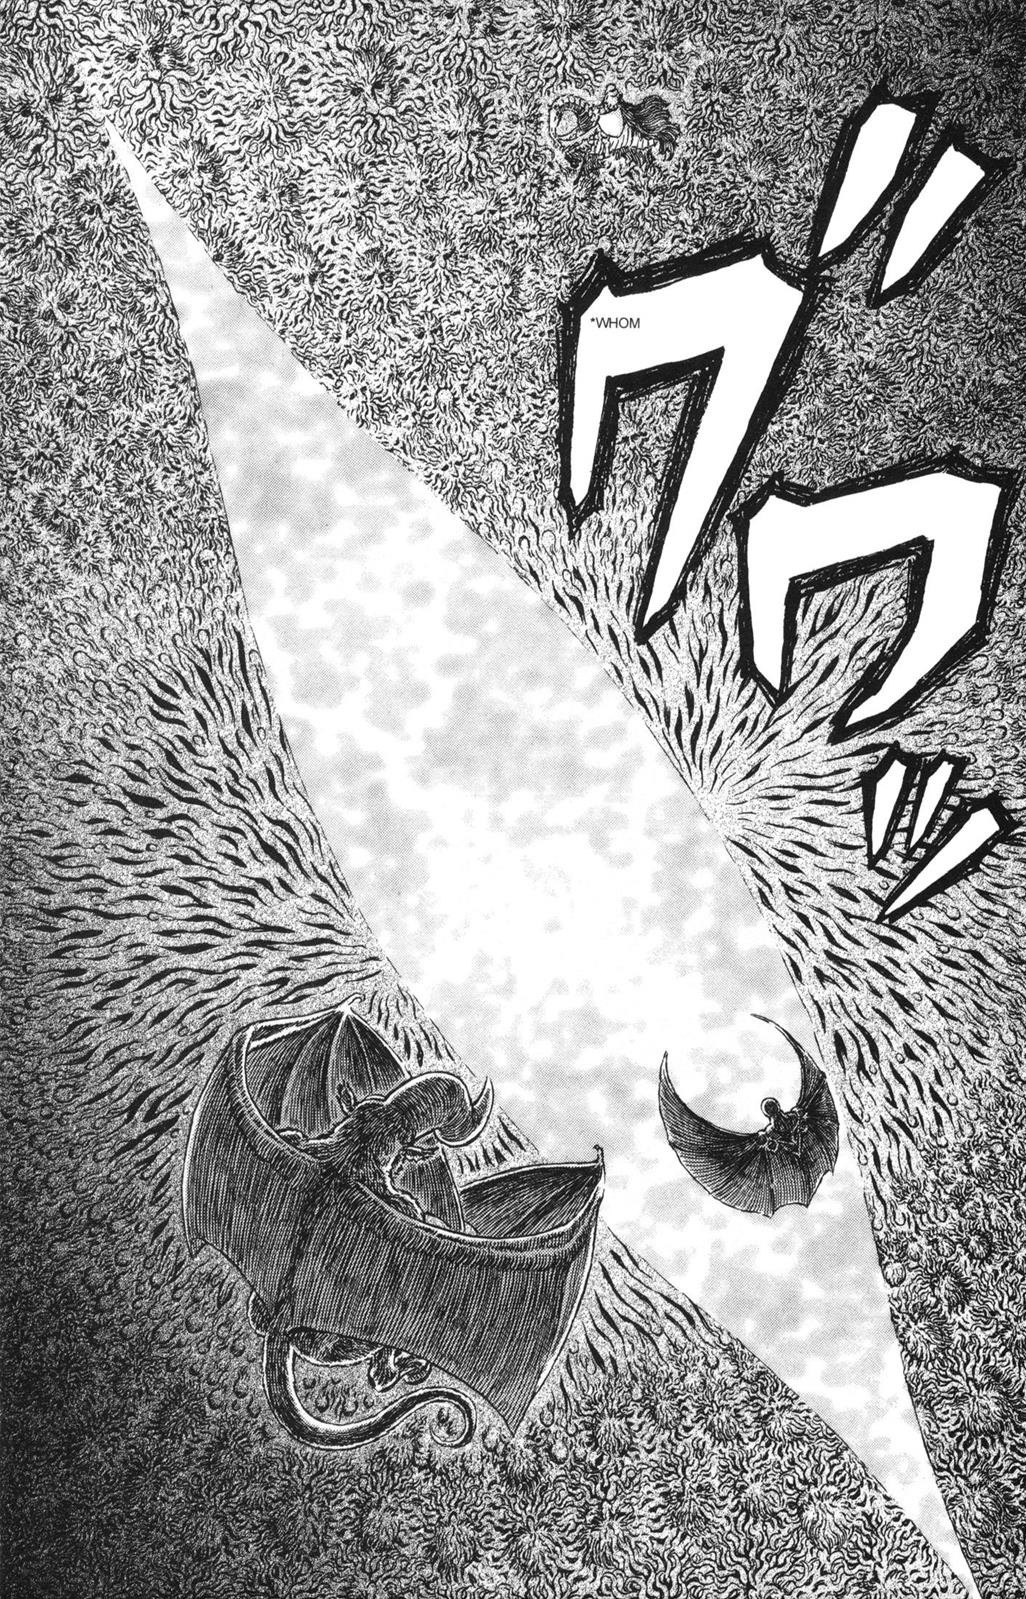 What are the abilities of the God Hand in Berserk? - Quora